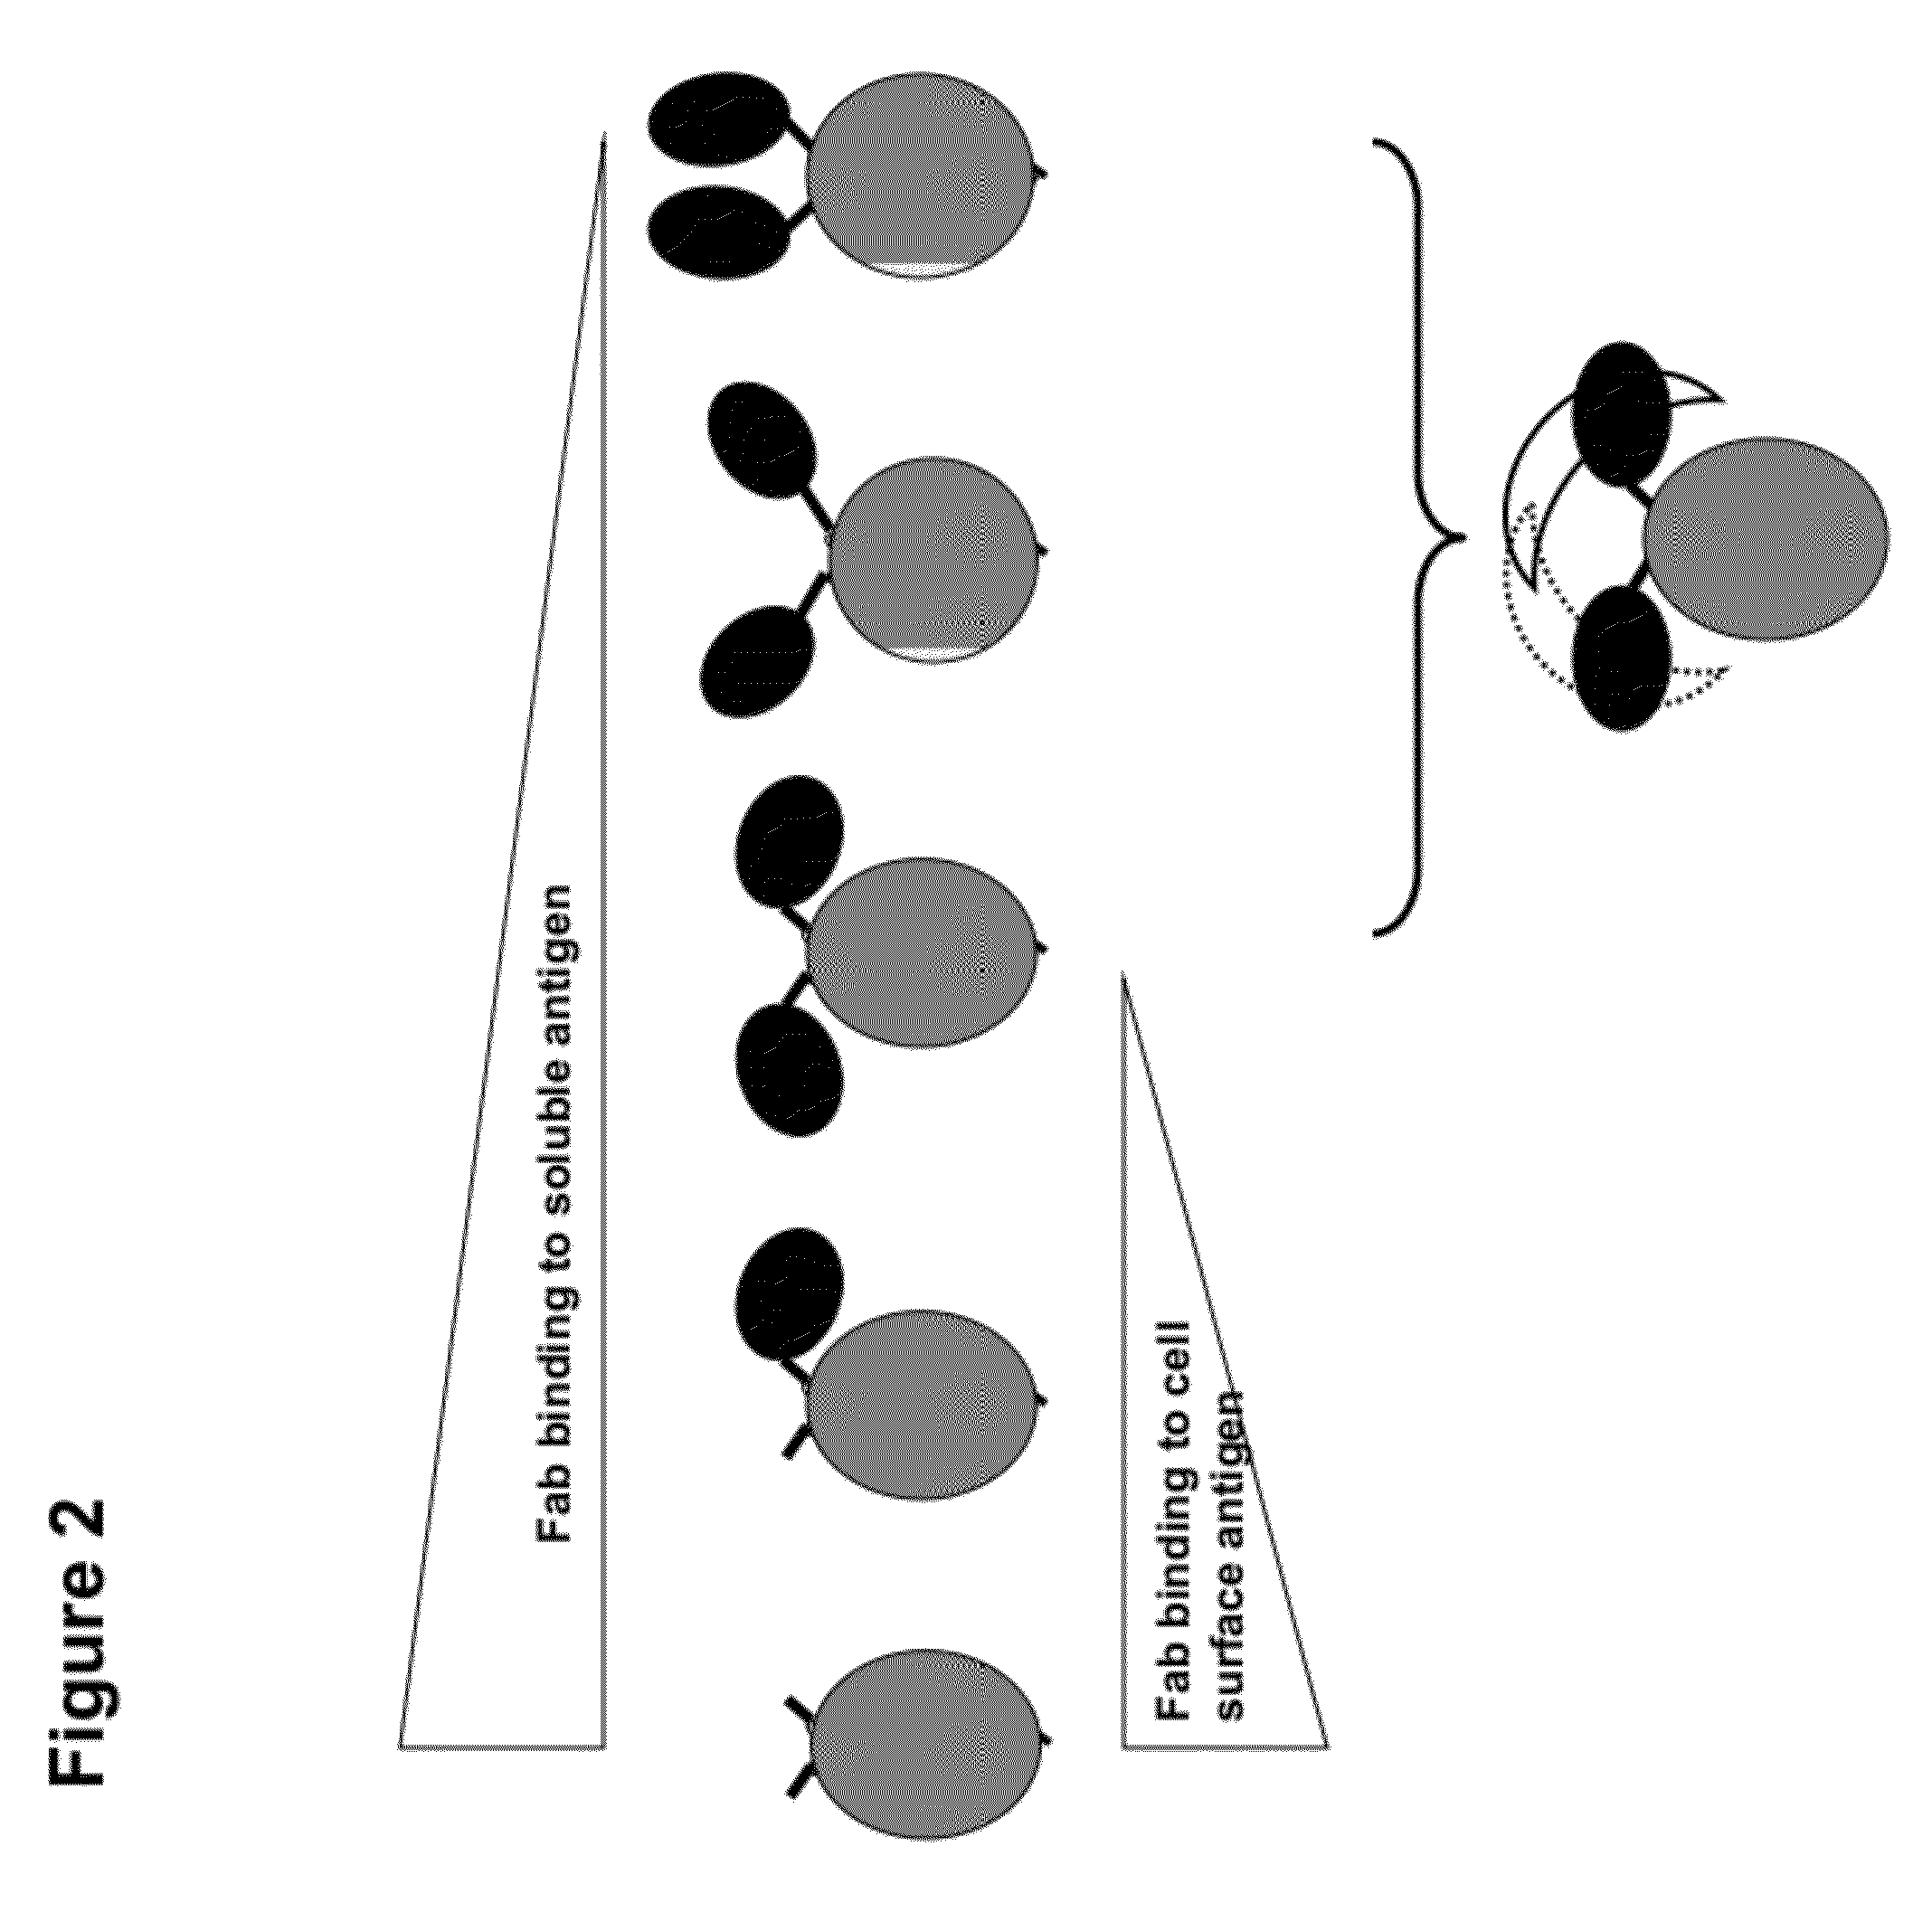 Multi-specific fab fusion proteins and methods of use